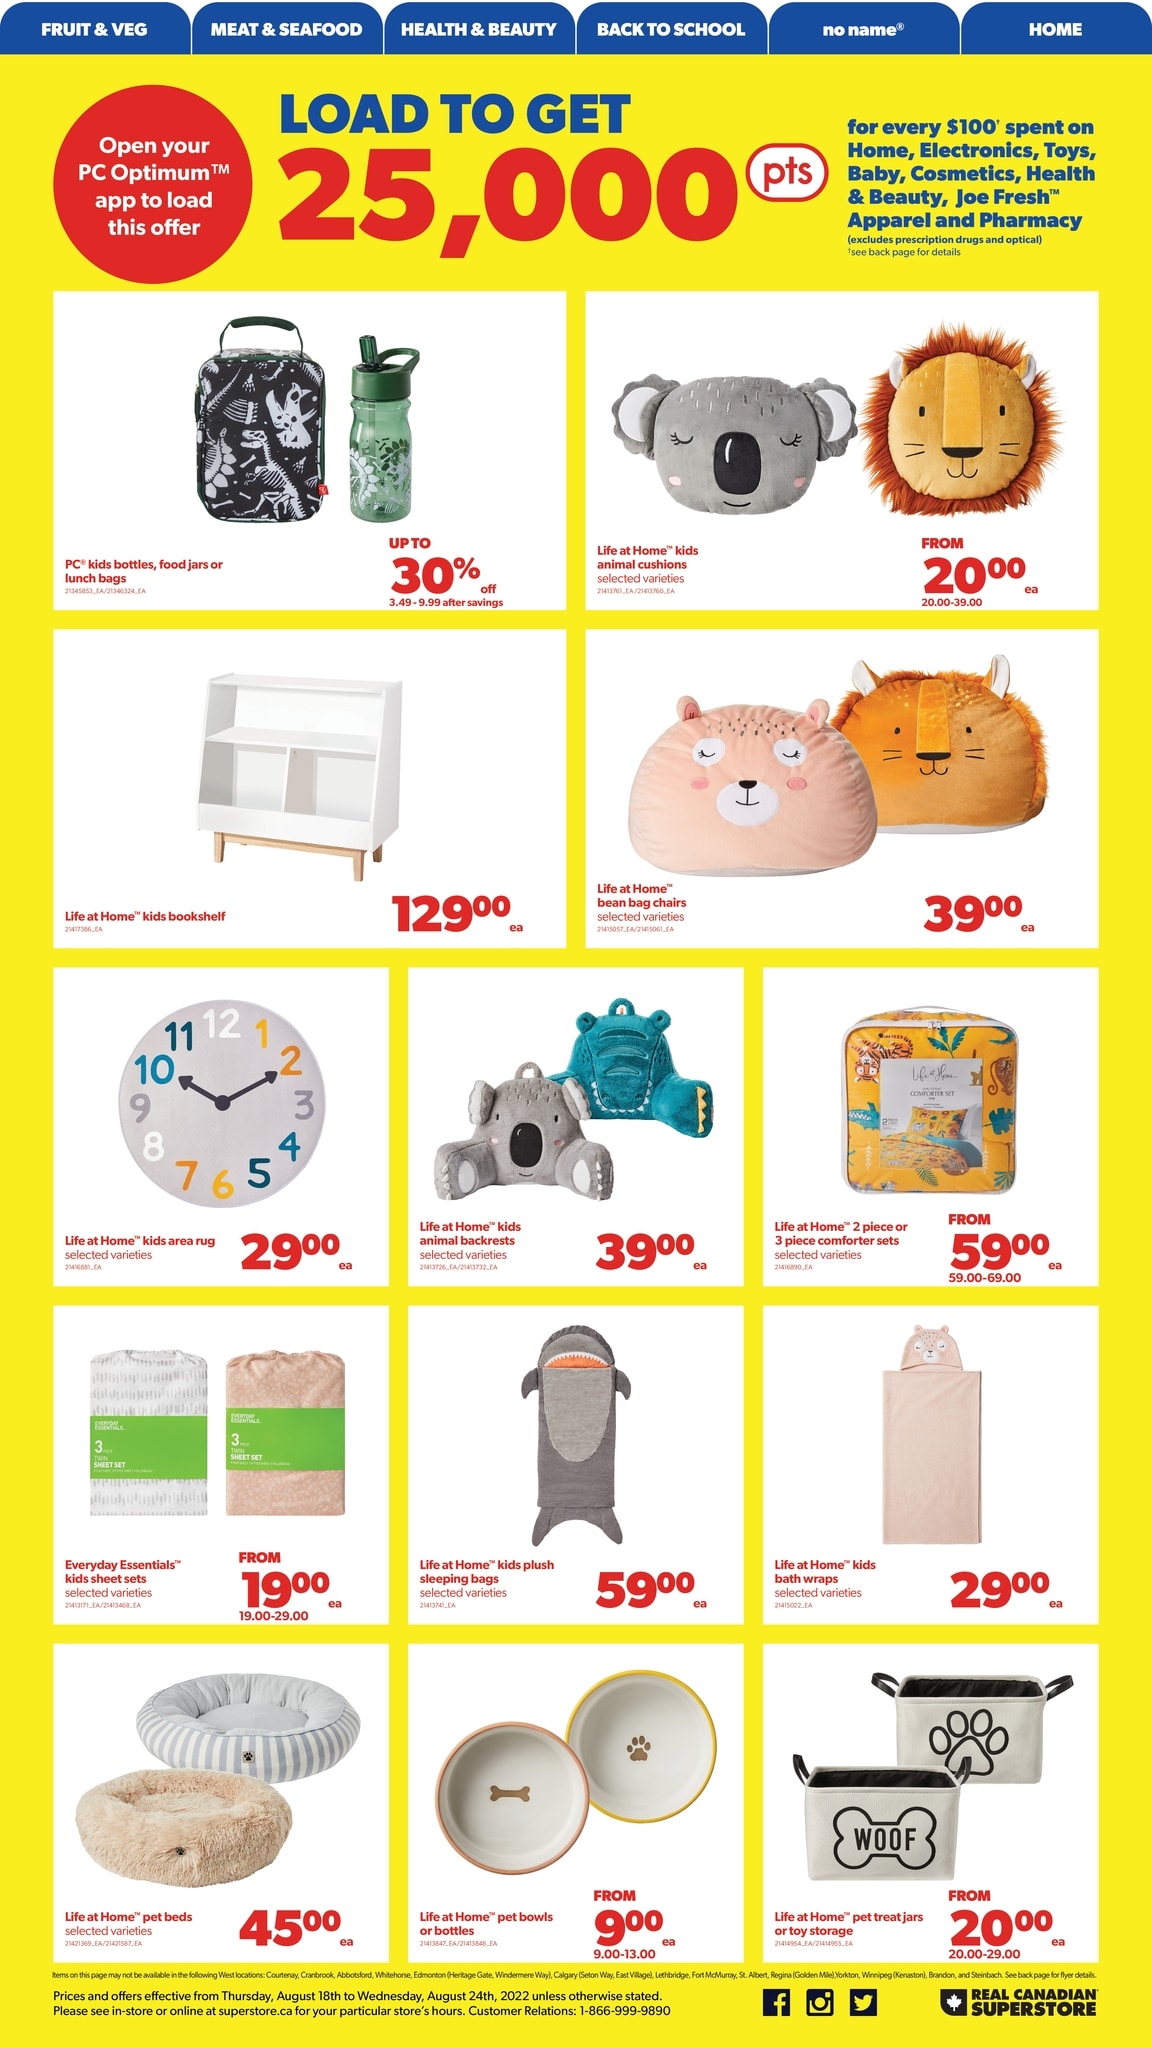 Real Canadian Superstore Western Canada - Weekly Flyer Specials - Page 26